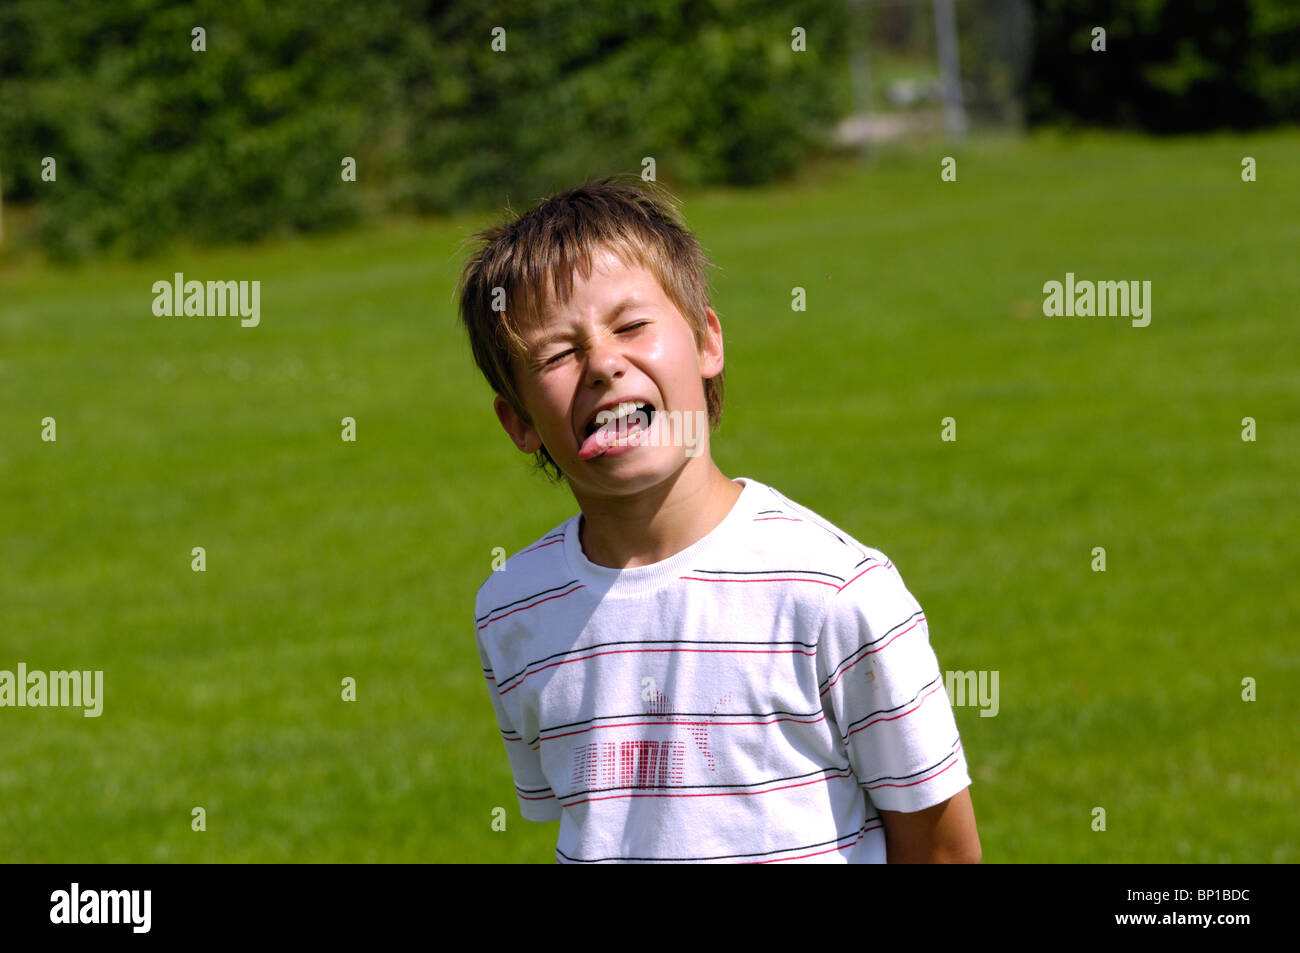 Young Boy sticking his tongue out and making funny faces Stock Photo